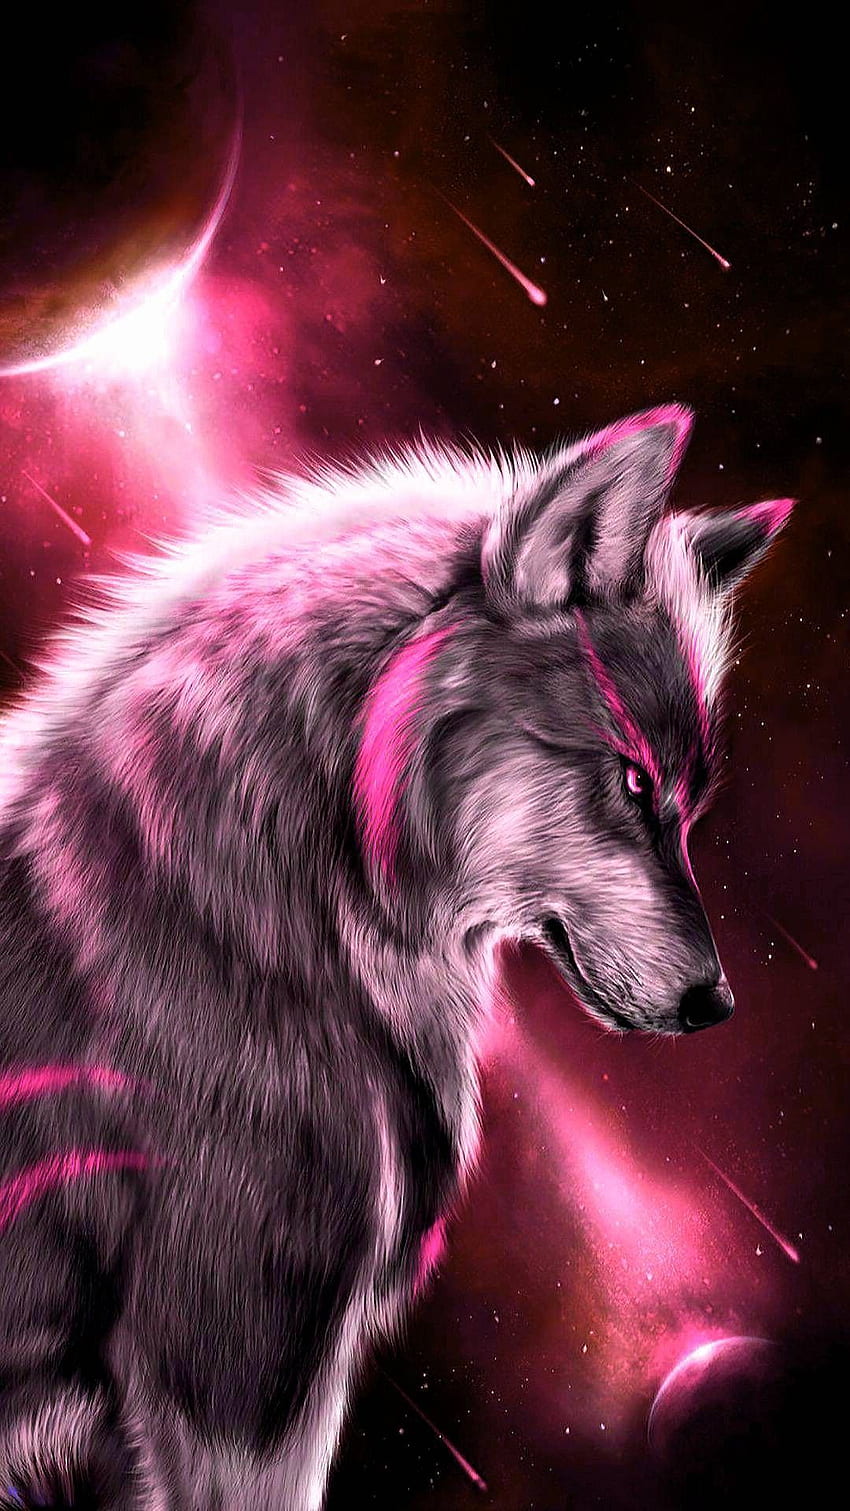 Download Cute Anime Wolf Girl with Purple Hair Wallpaper | Wallpapers.com